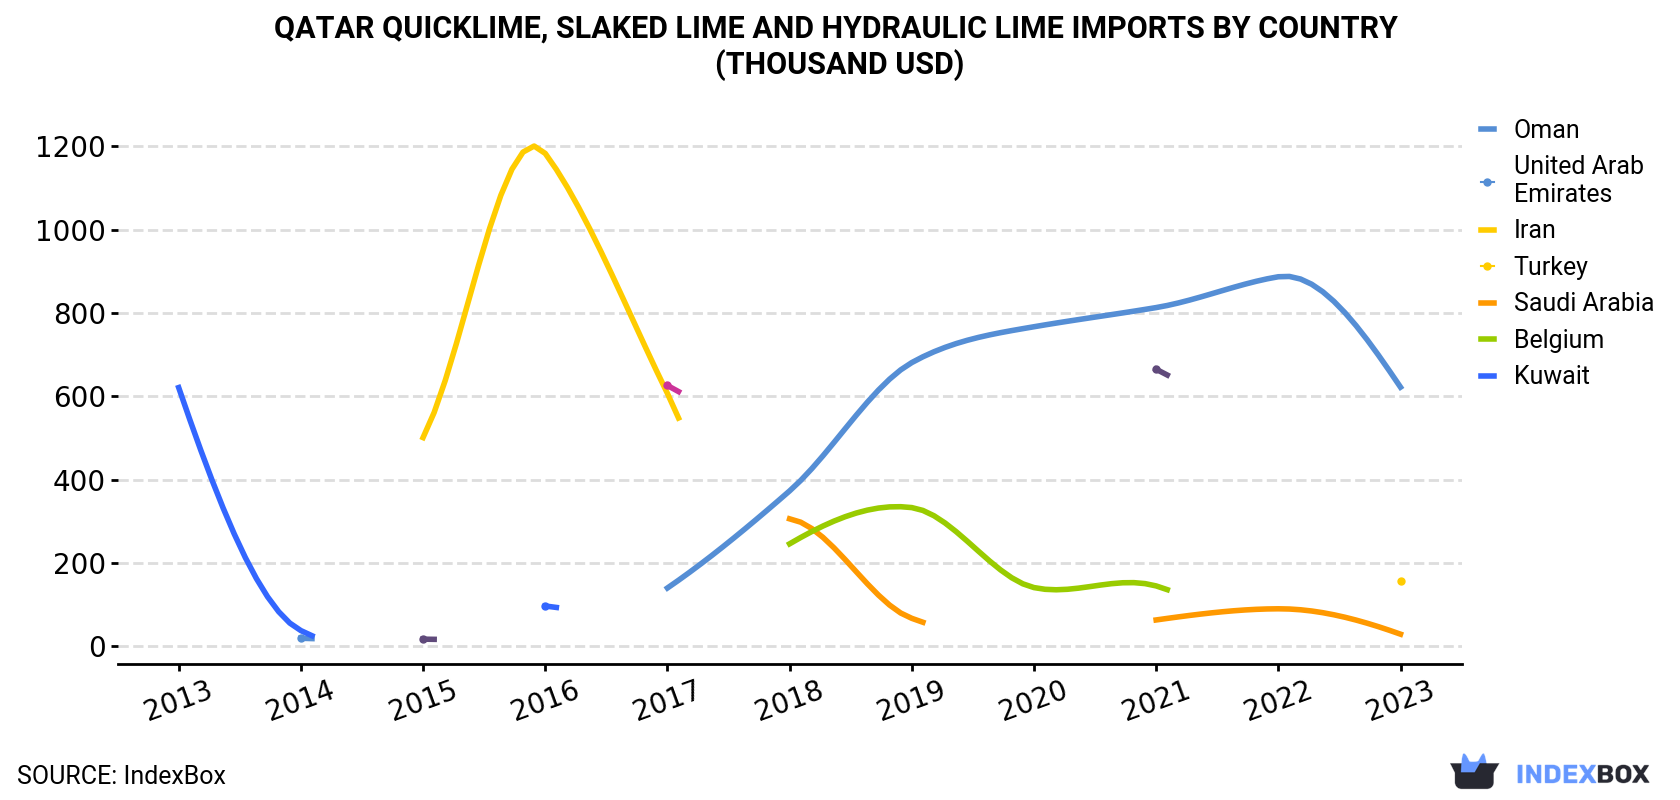 Qatar Quicklime, Slaked Lime and Hydraulic Lime Imports By Country (Thousand USD)